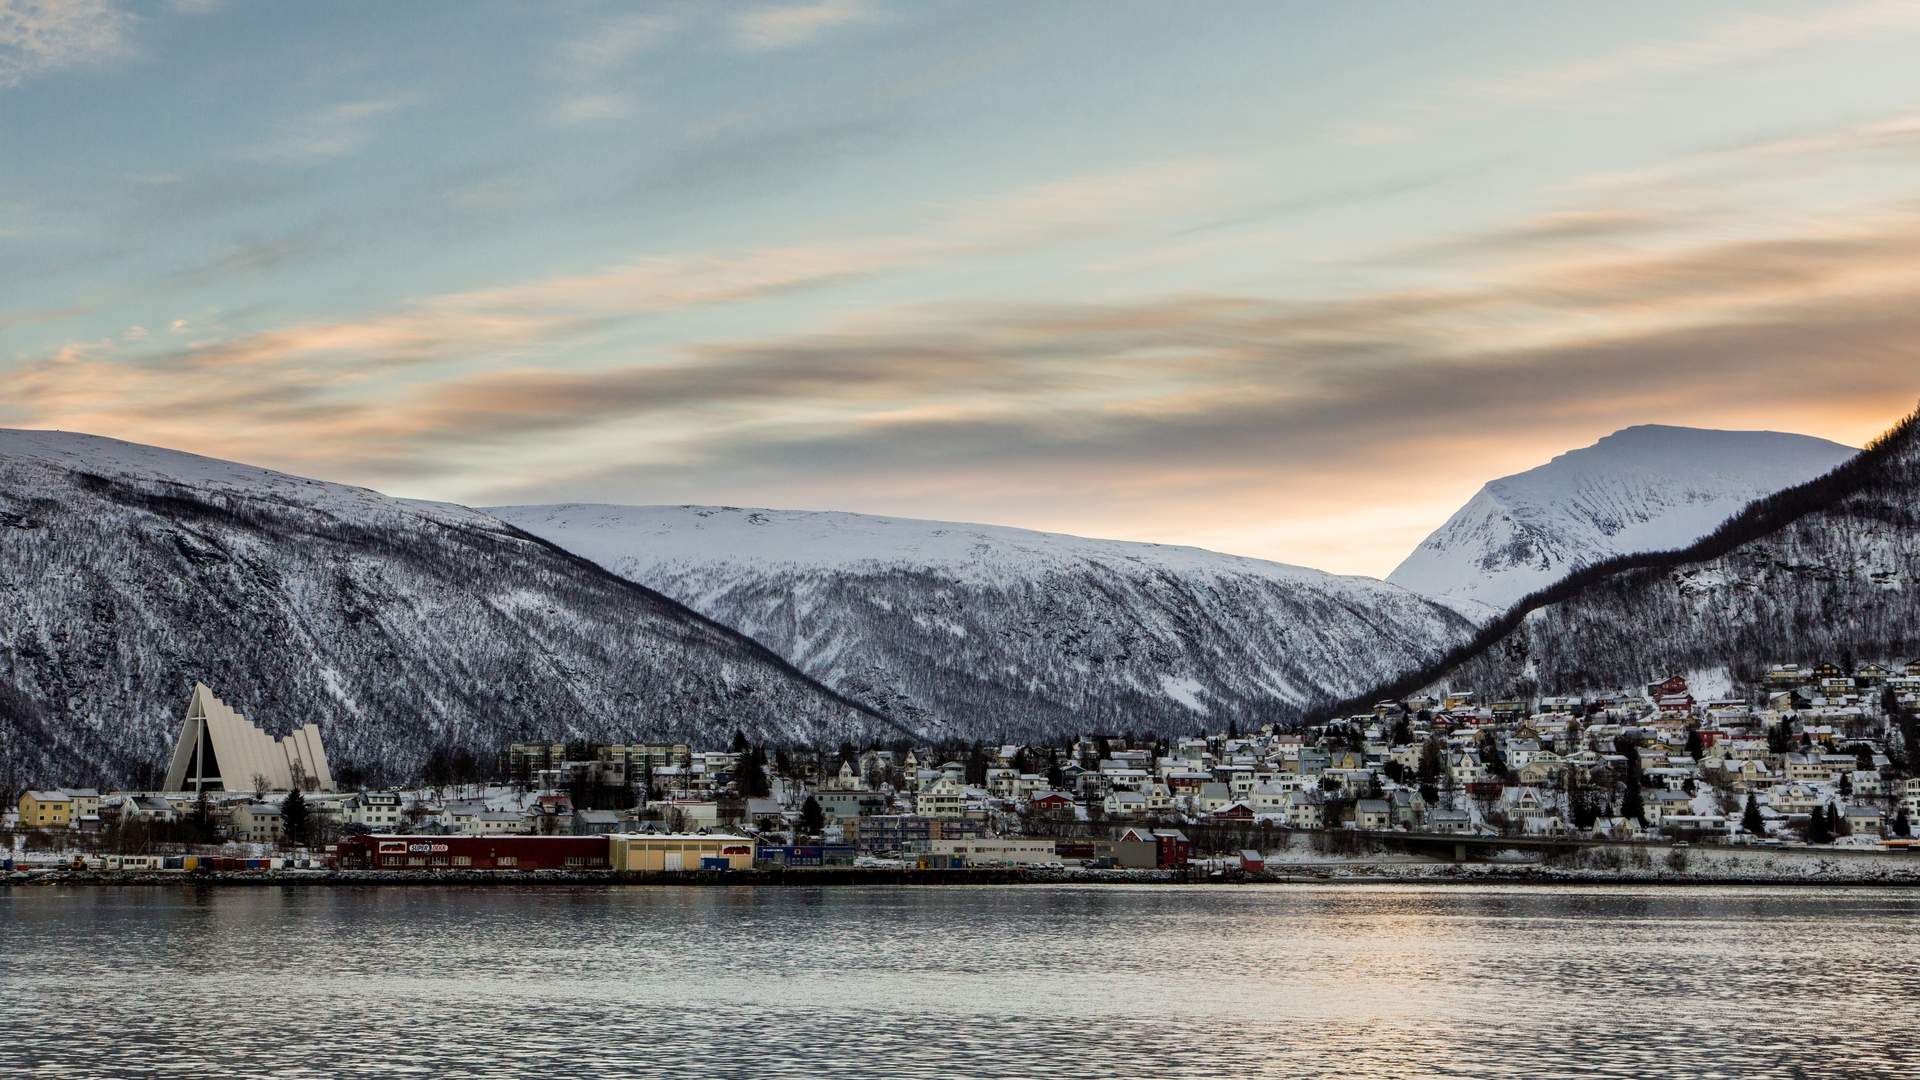 Cityscape Tromso The Artic Cathedral Norway Fjord Mountains Snow Nature Sky Clouds Village 1920x1080